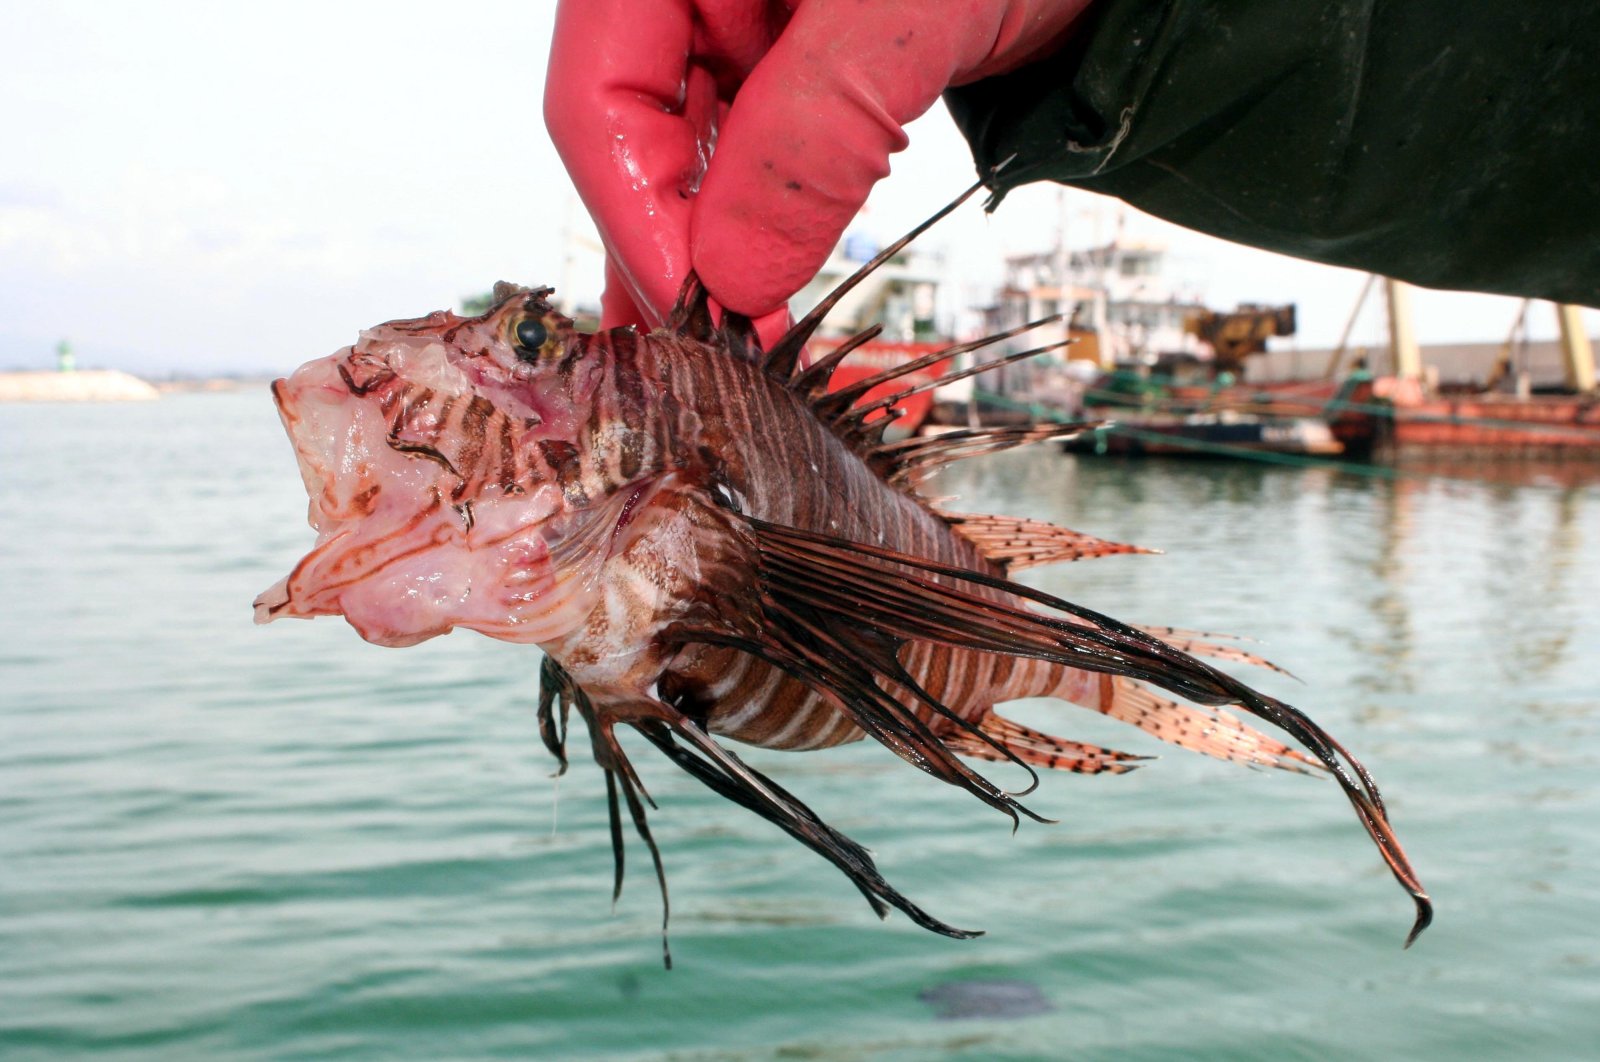 A fisherman holds a lionfish, an invasive species, caught in Mersin, southern Türkiye, March 15, 2019. (DHA Photo)